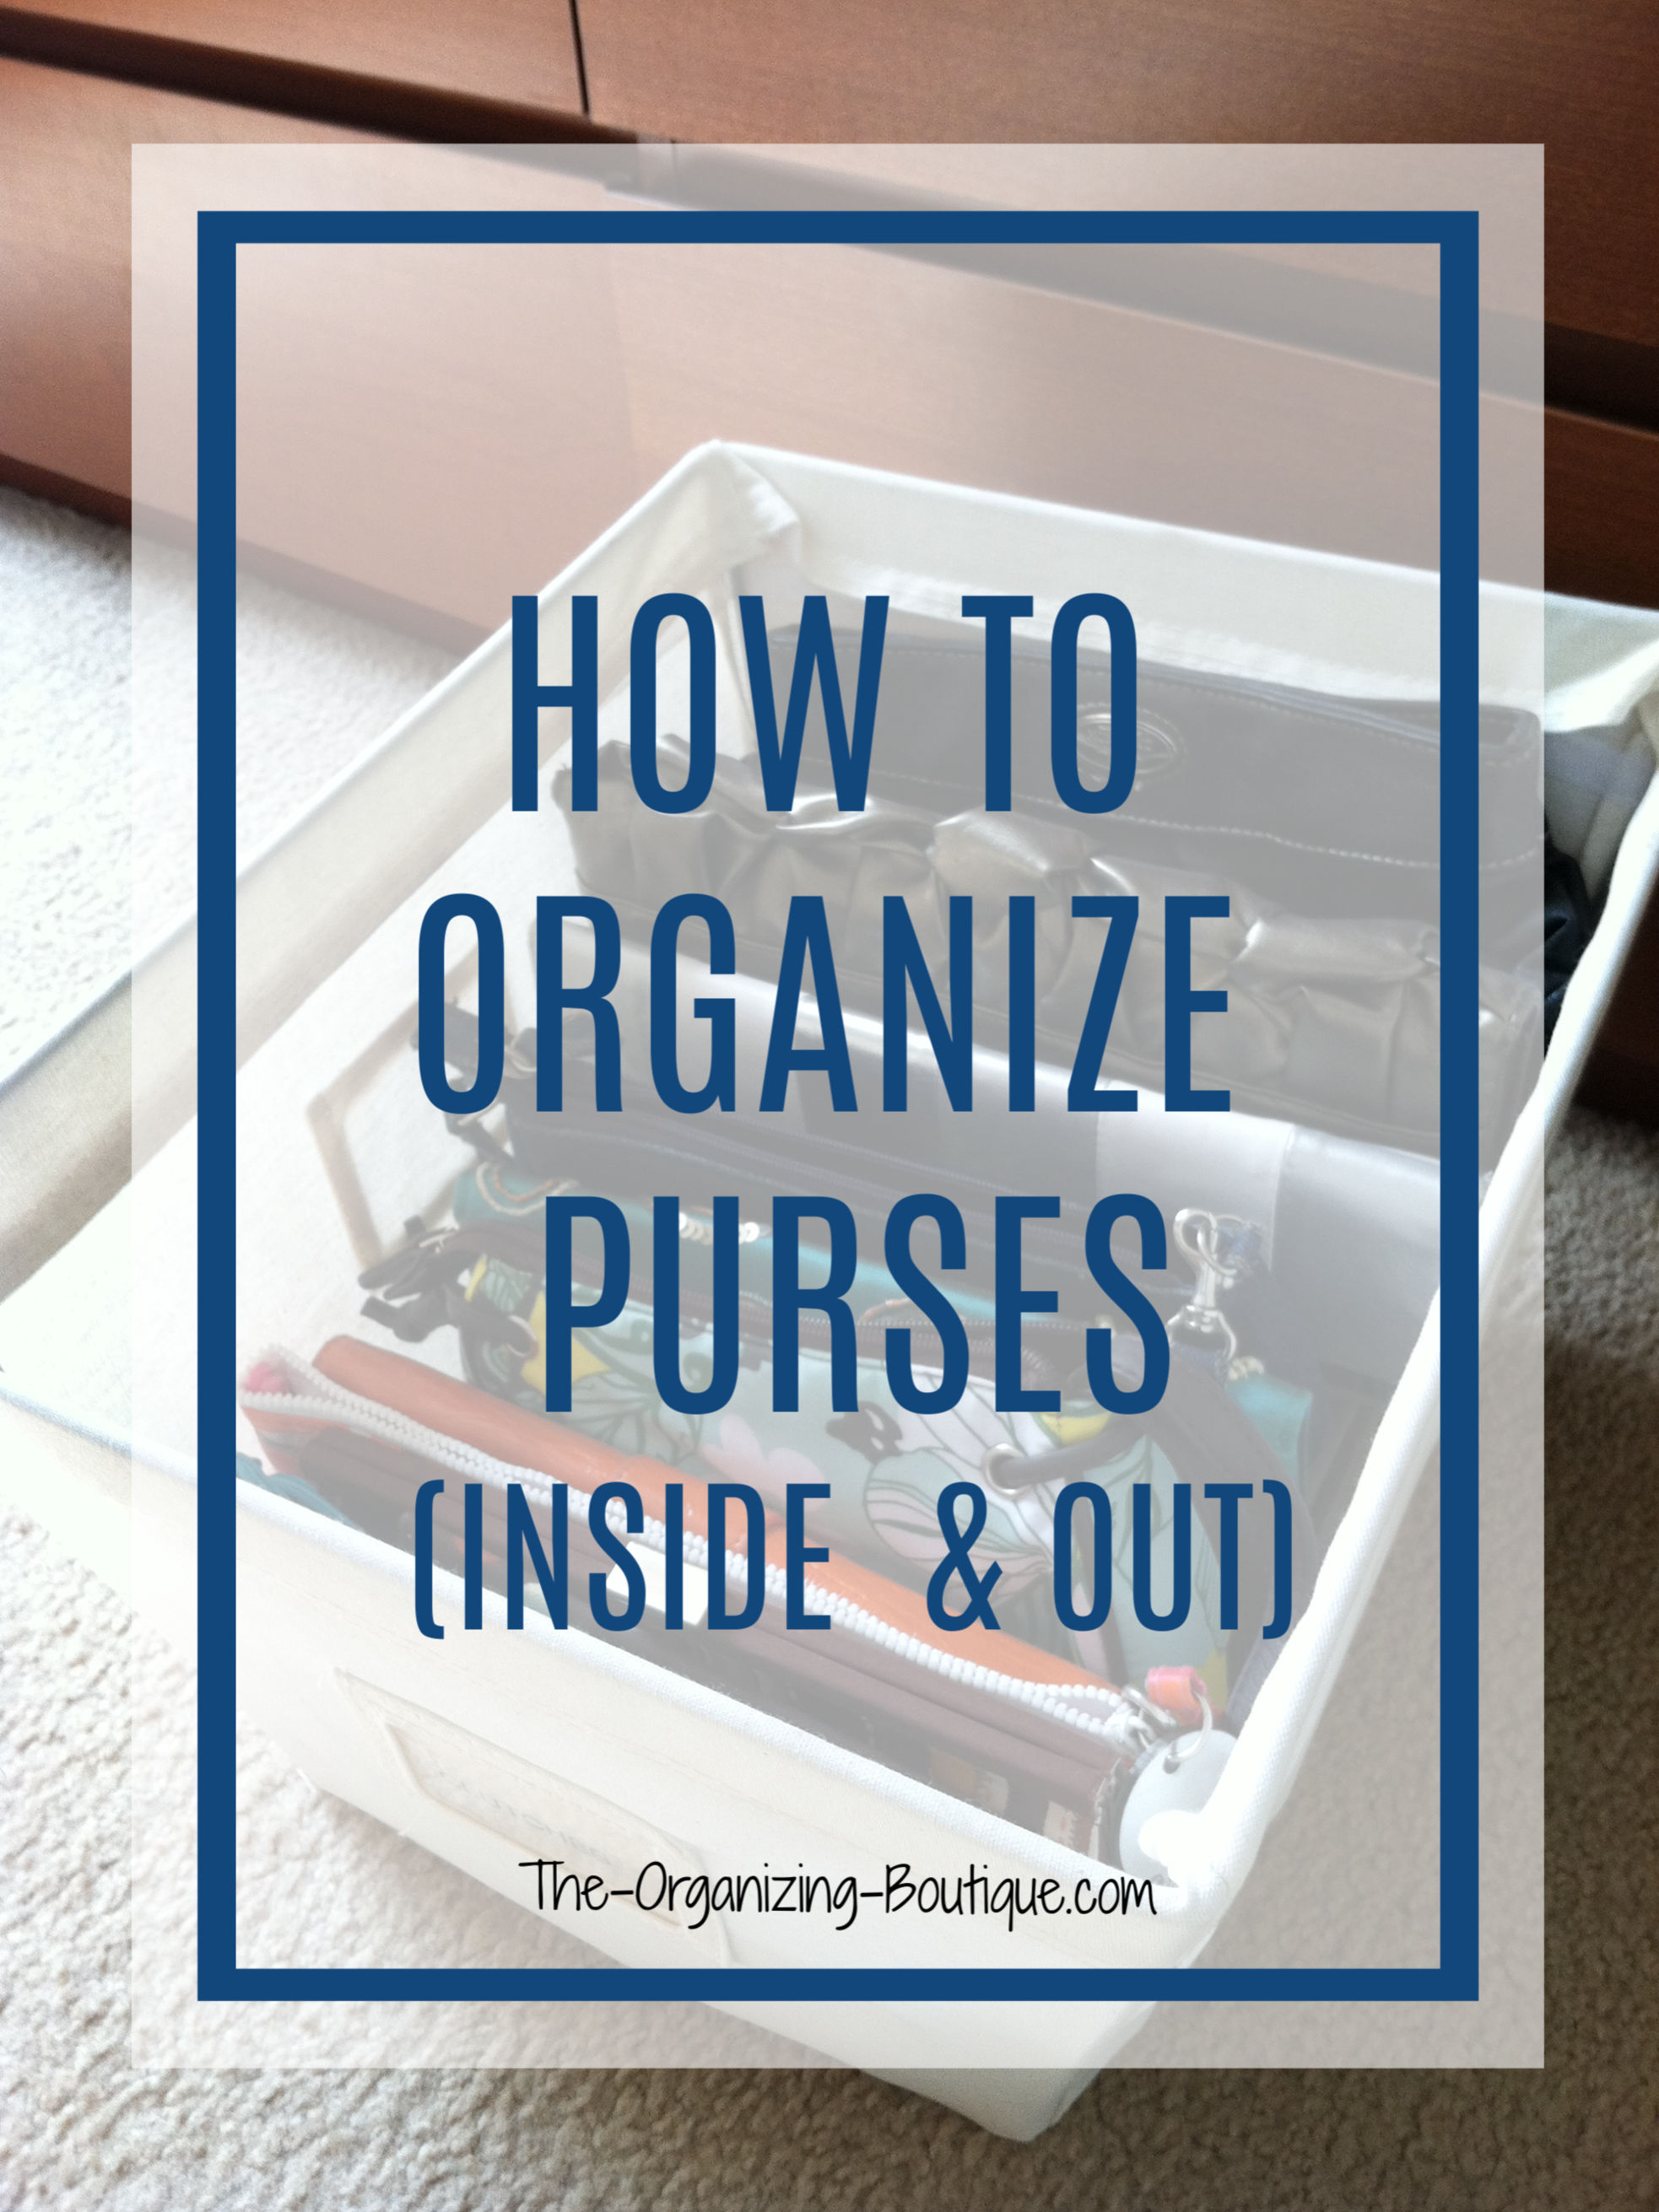 Looking for organizer purses, a purse insert organizer, rfid wallet? Check out these tips on organizing purses inside and out!